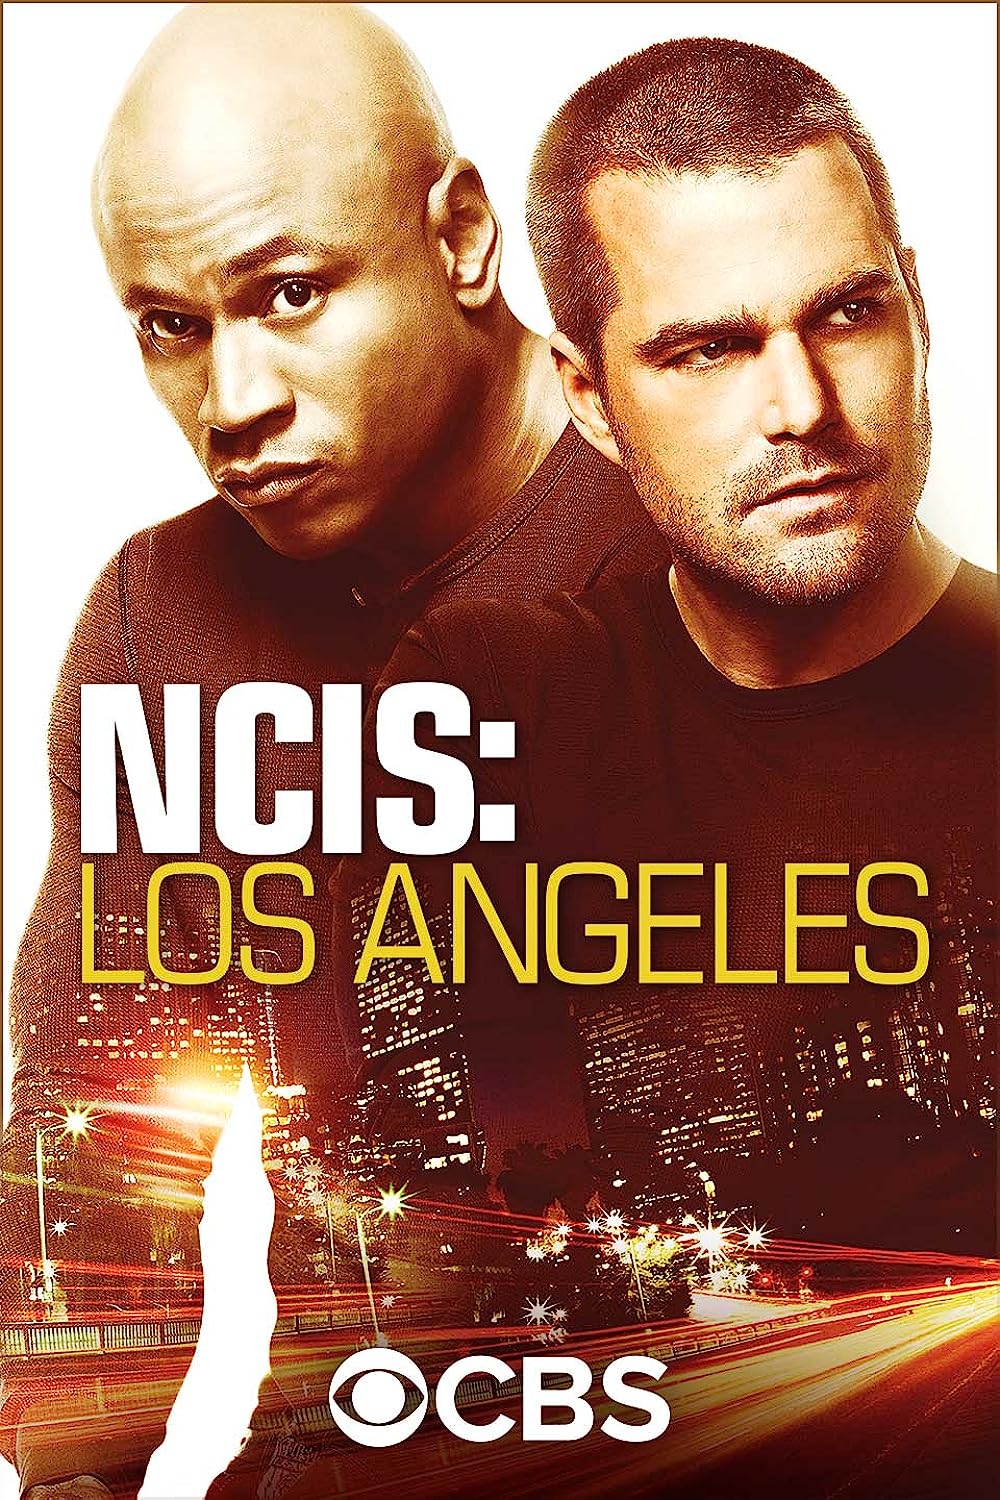 NCIS: Los Angeles poster